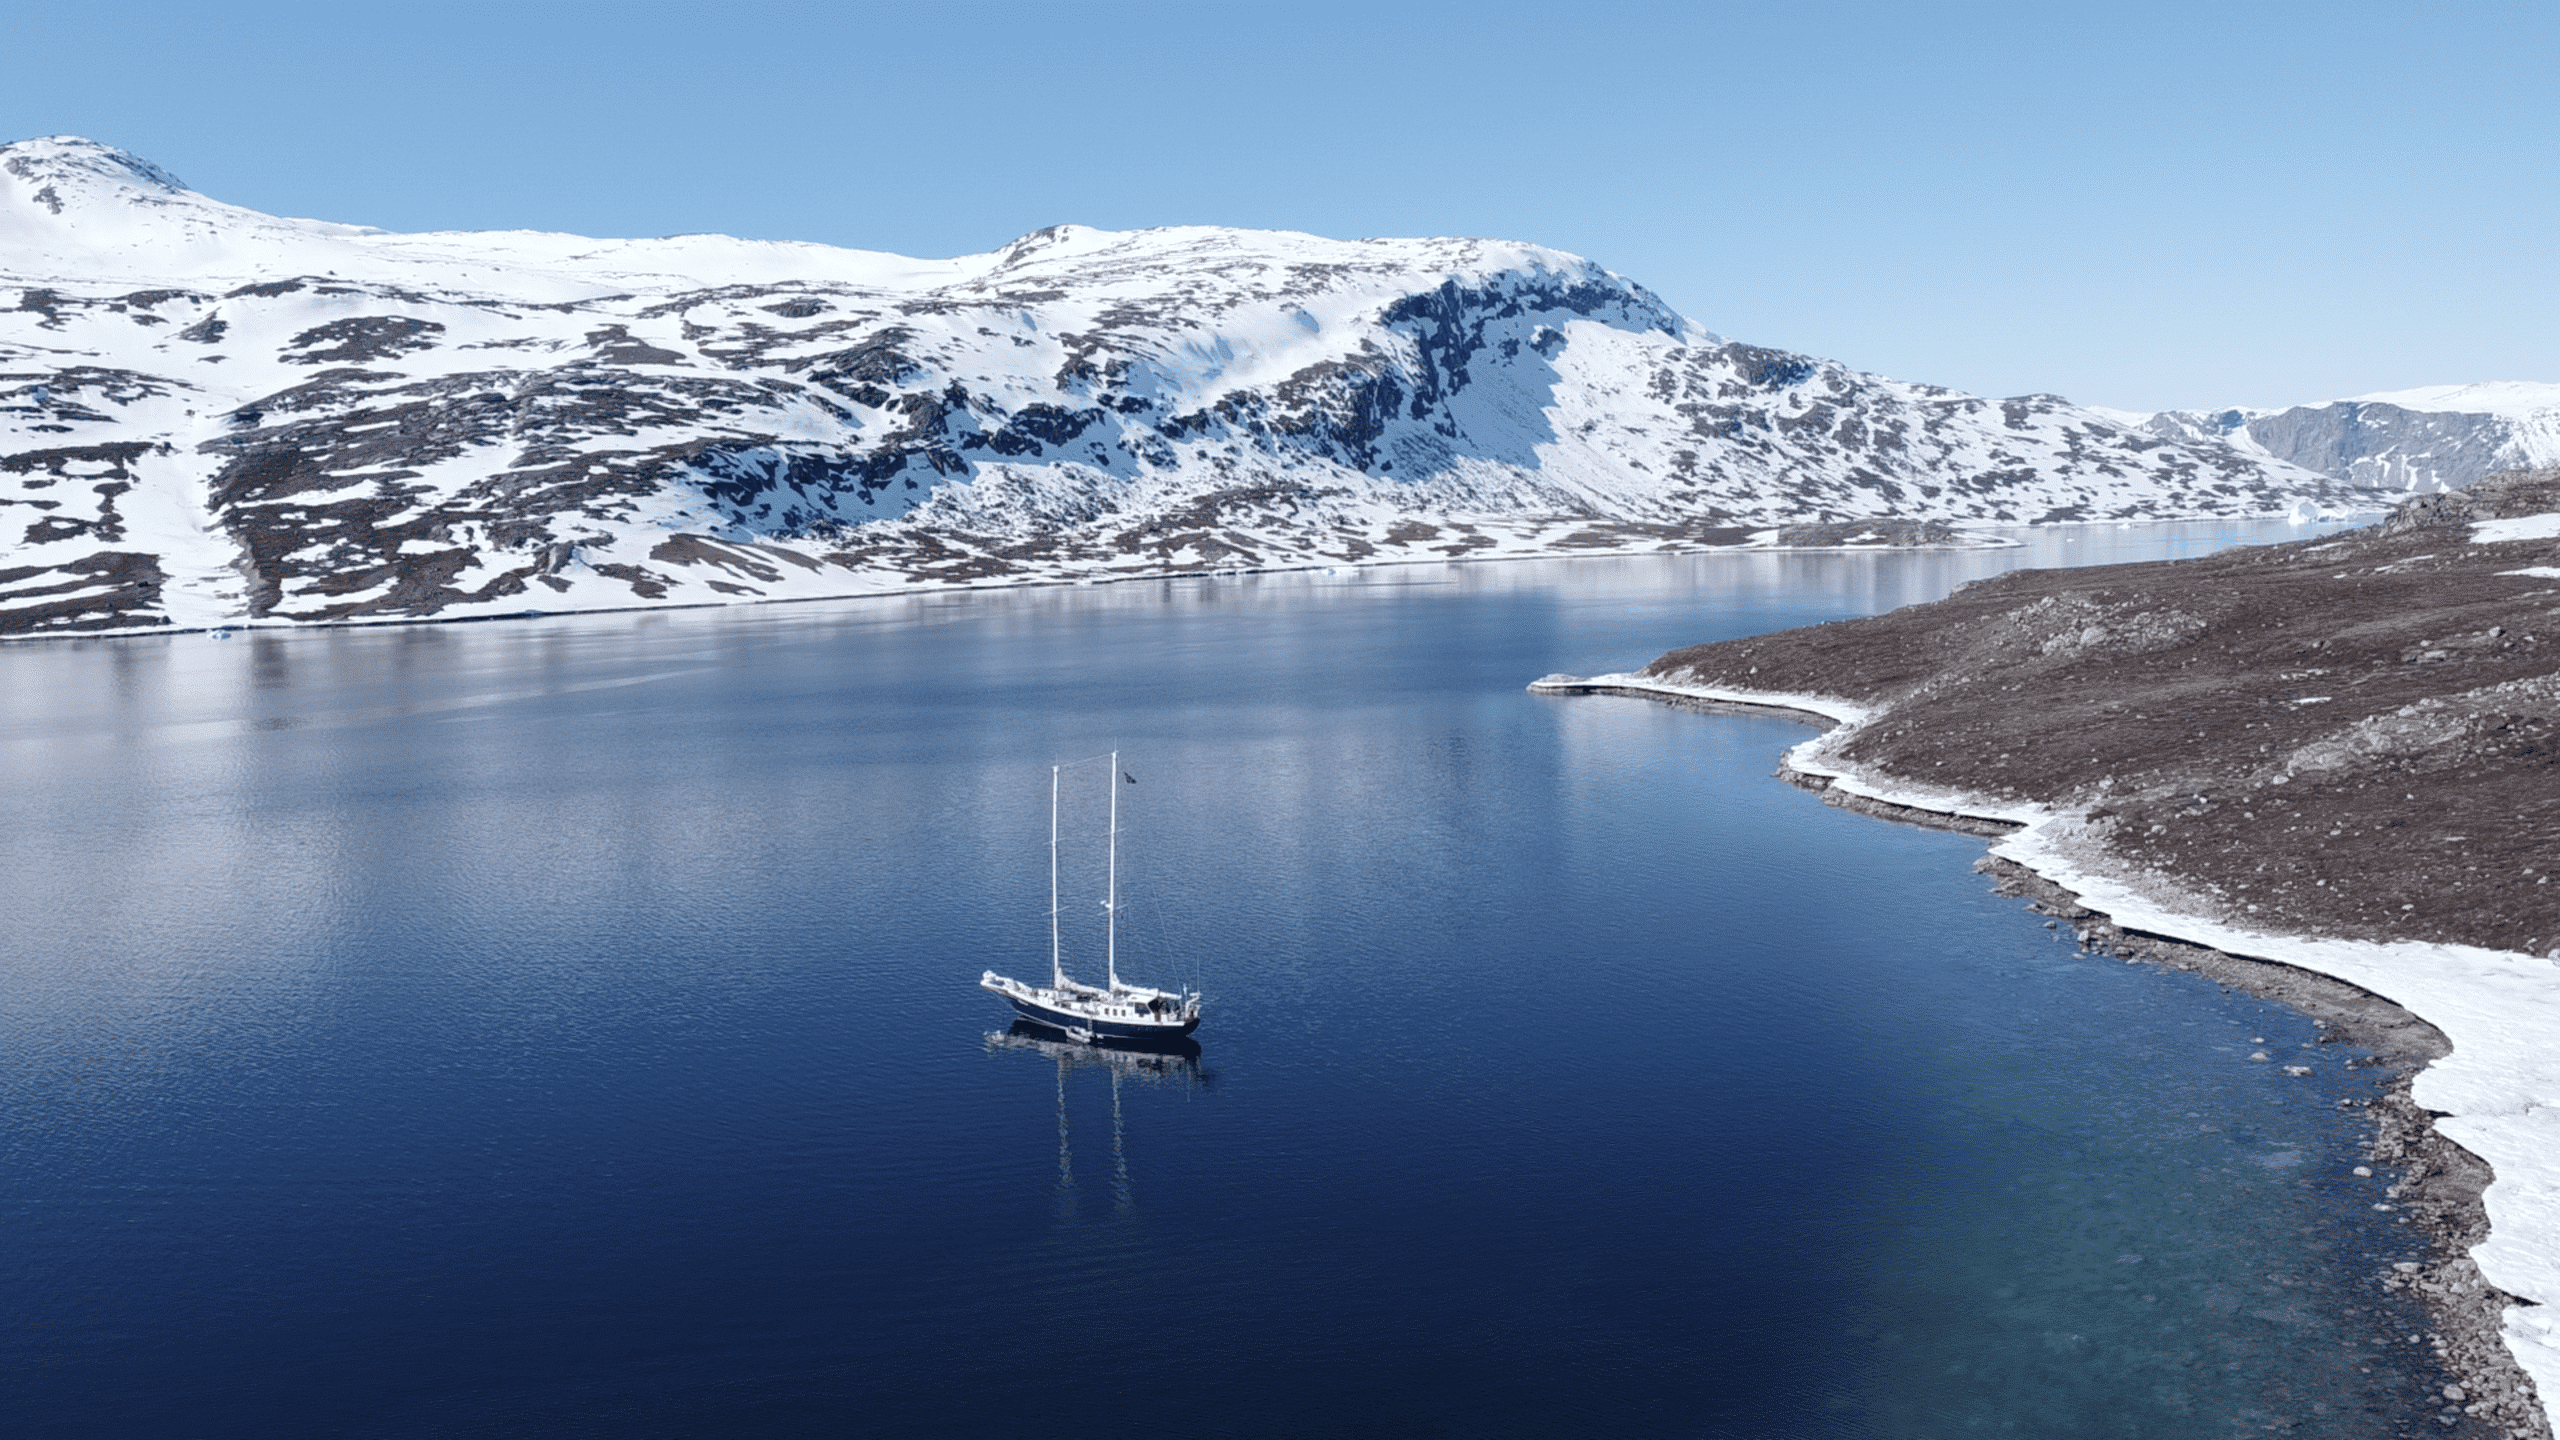 A boat on a blue water surrounded by snowy gray land.